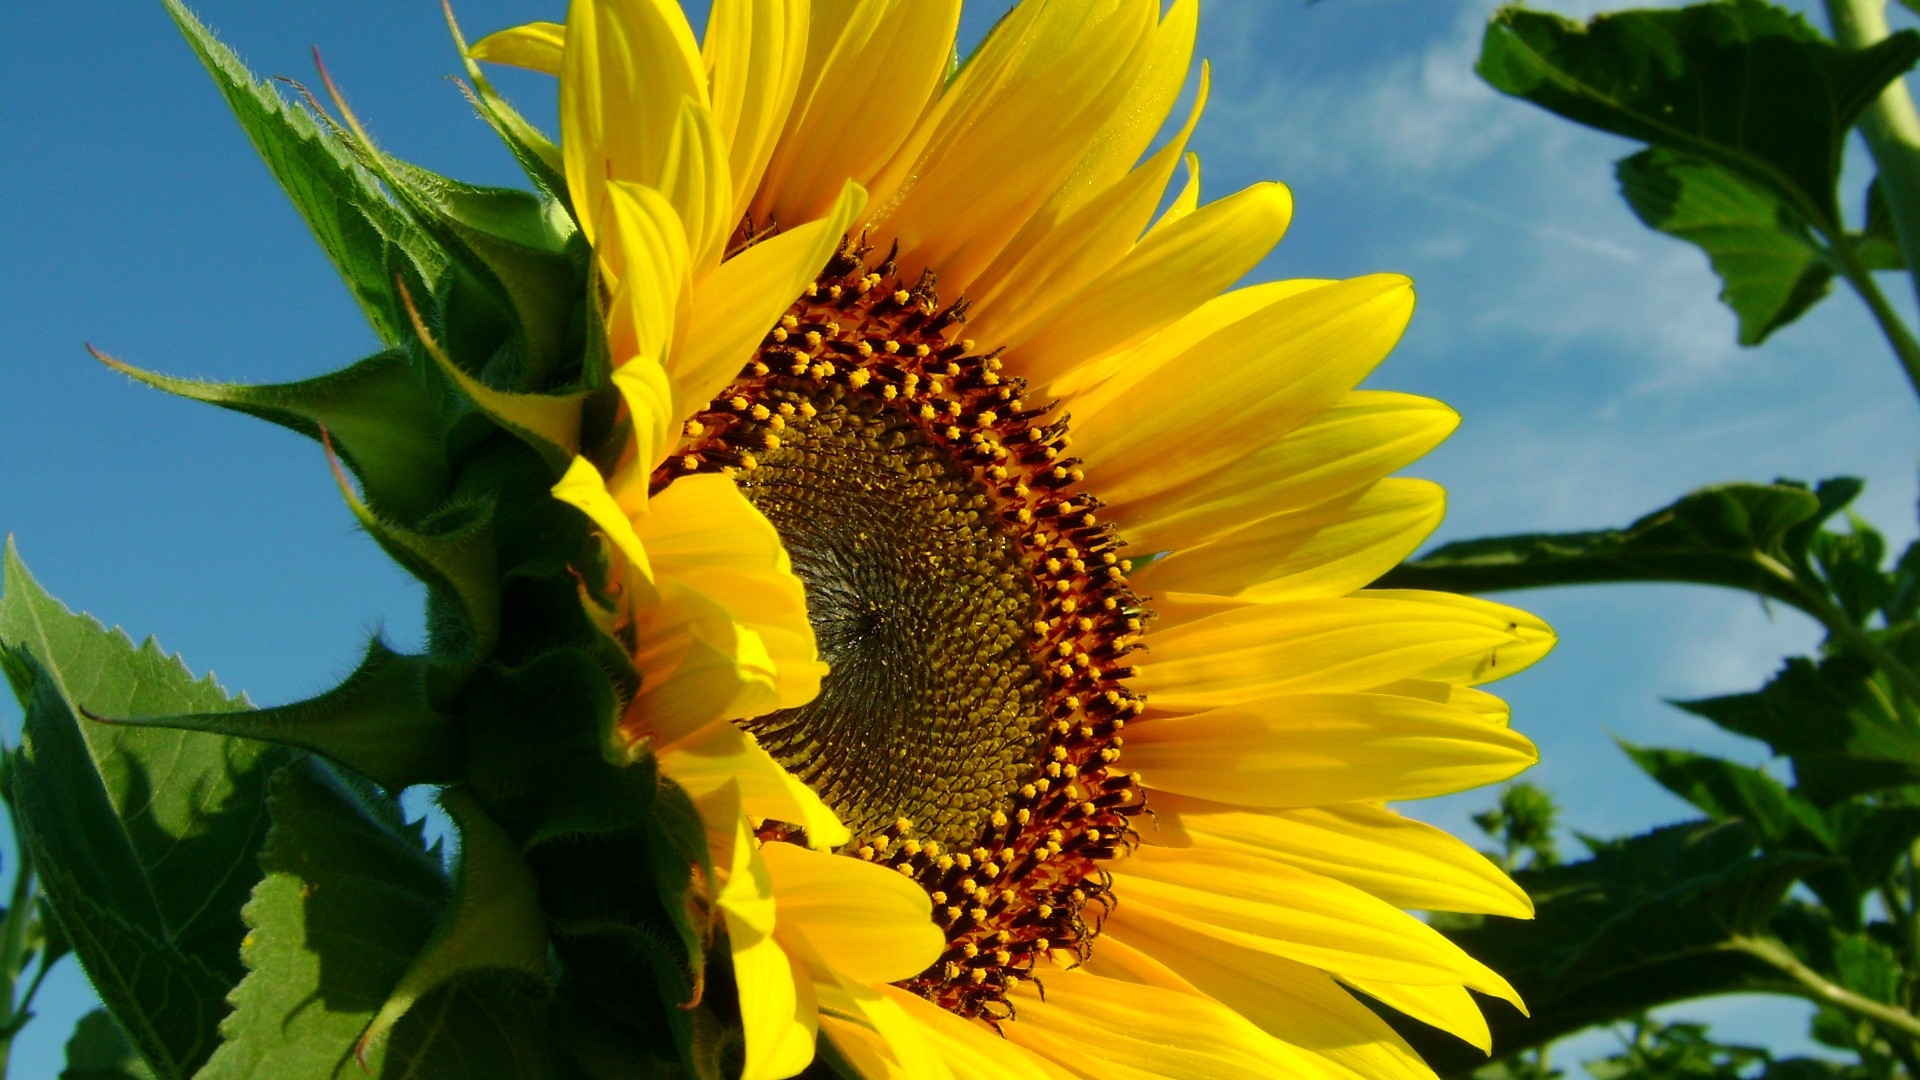 Sunflower Wallpapers Images Photos Pictures Backgrounds